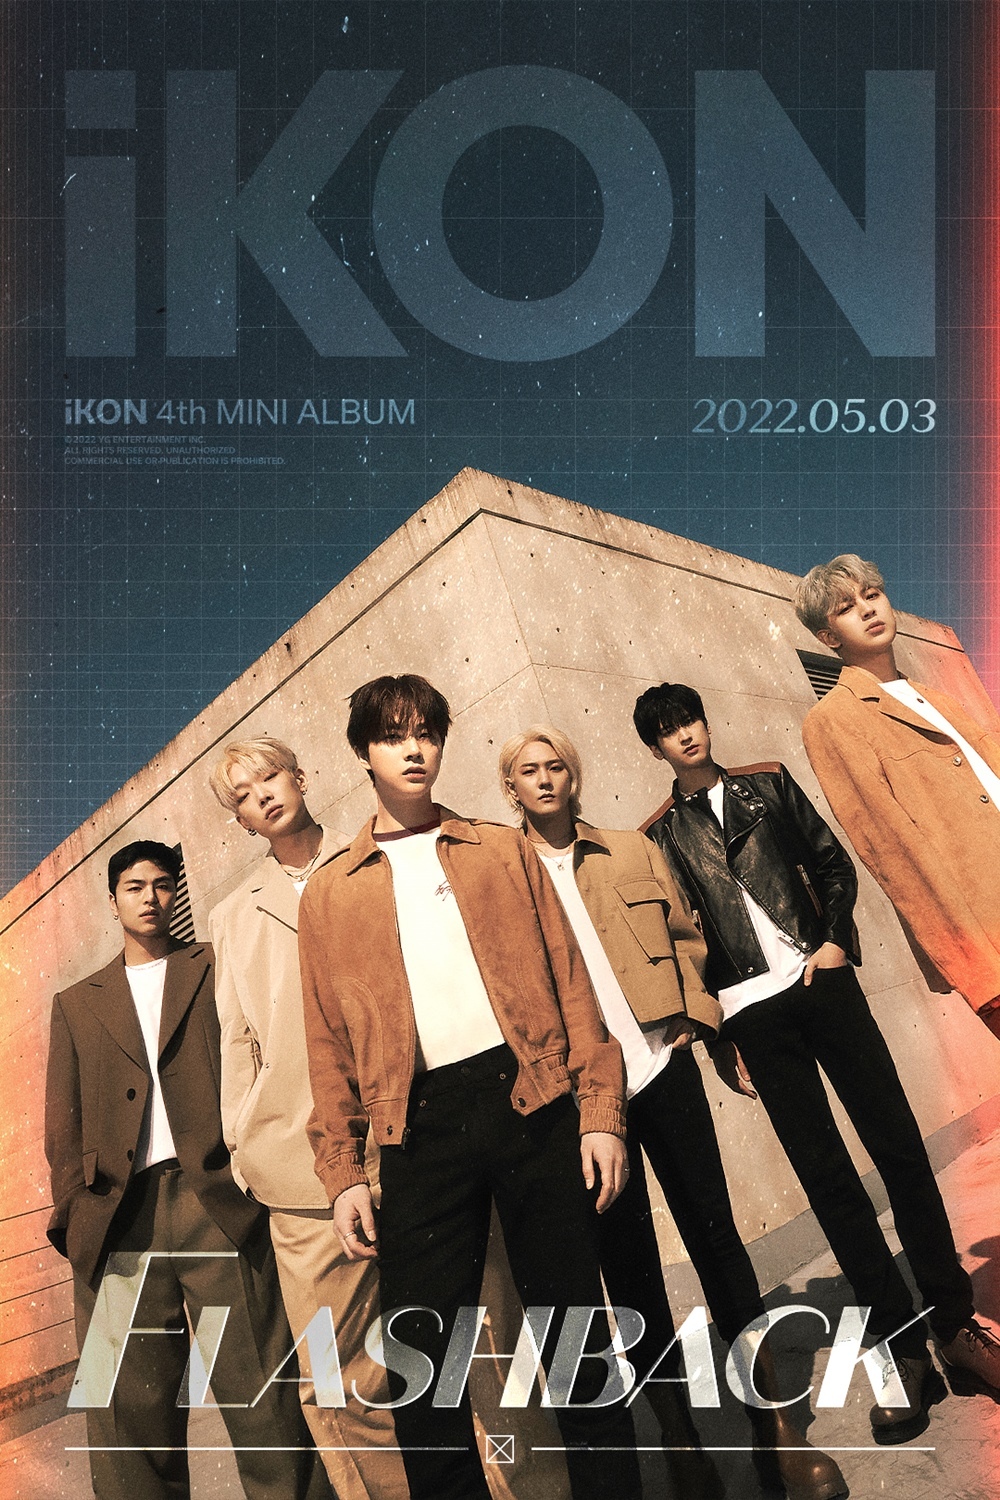 The poster of iKON’s fourth EP “Flashback” (YG Entertainment)